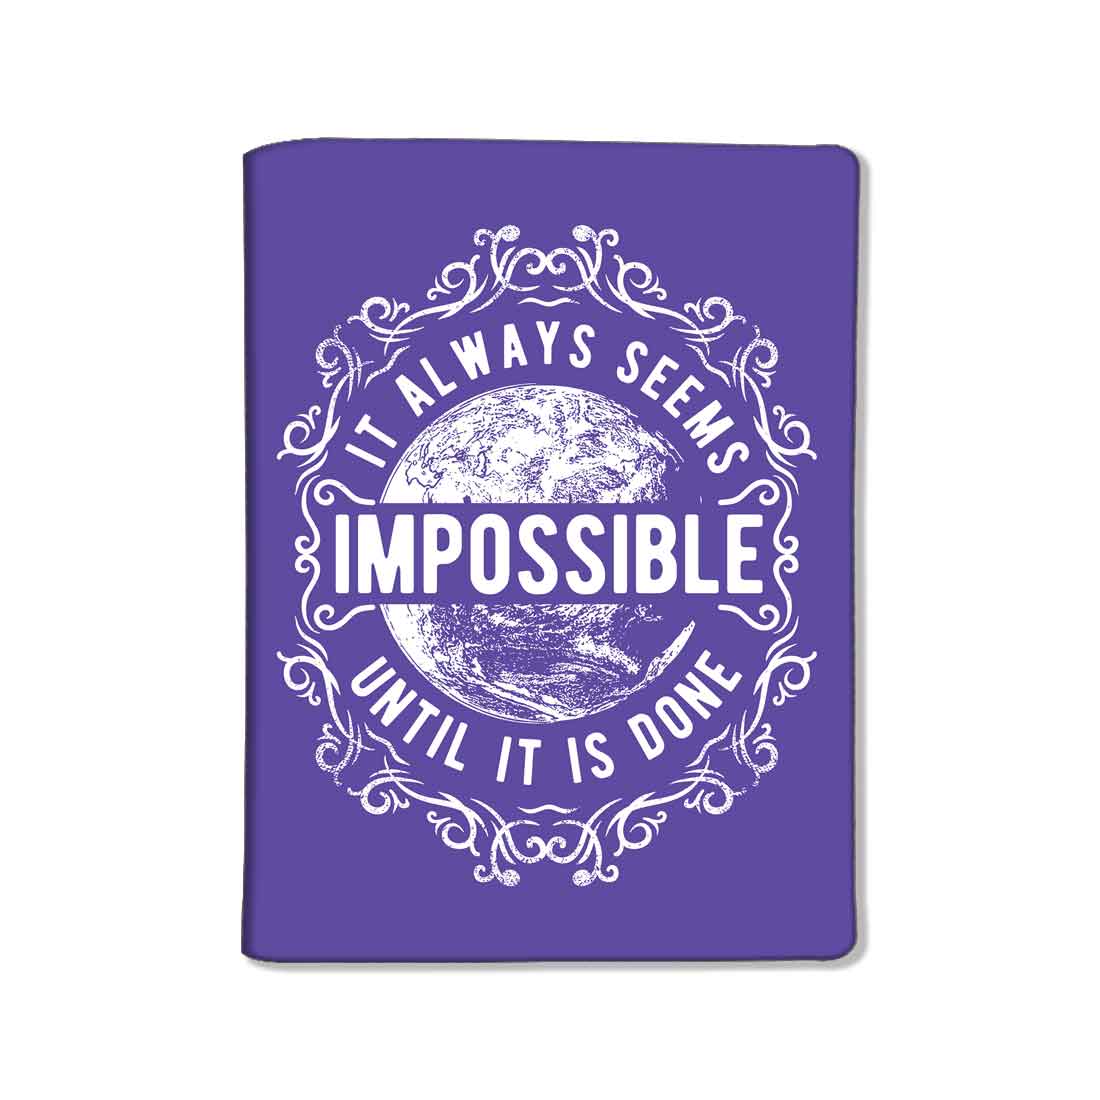 Travel Passport Holder Travel Case with Luggage Tag - Impossible